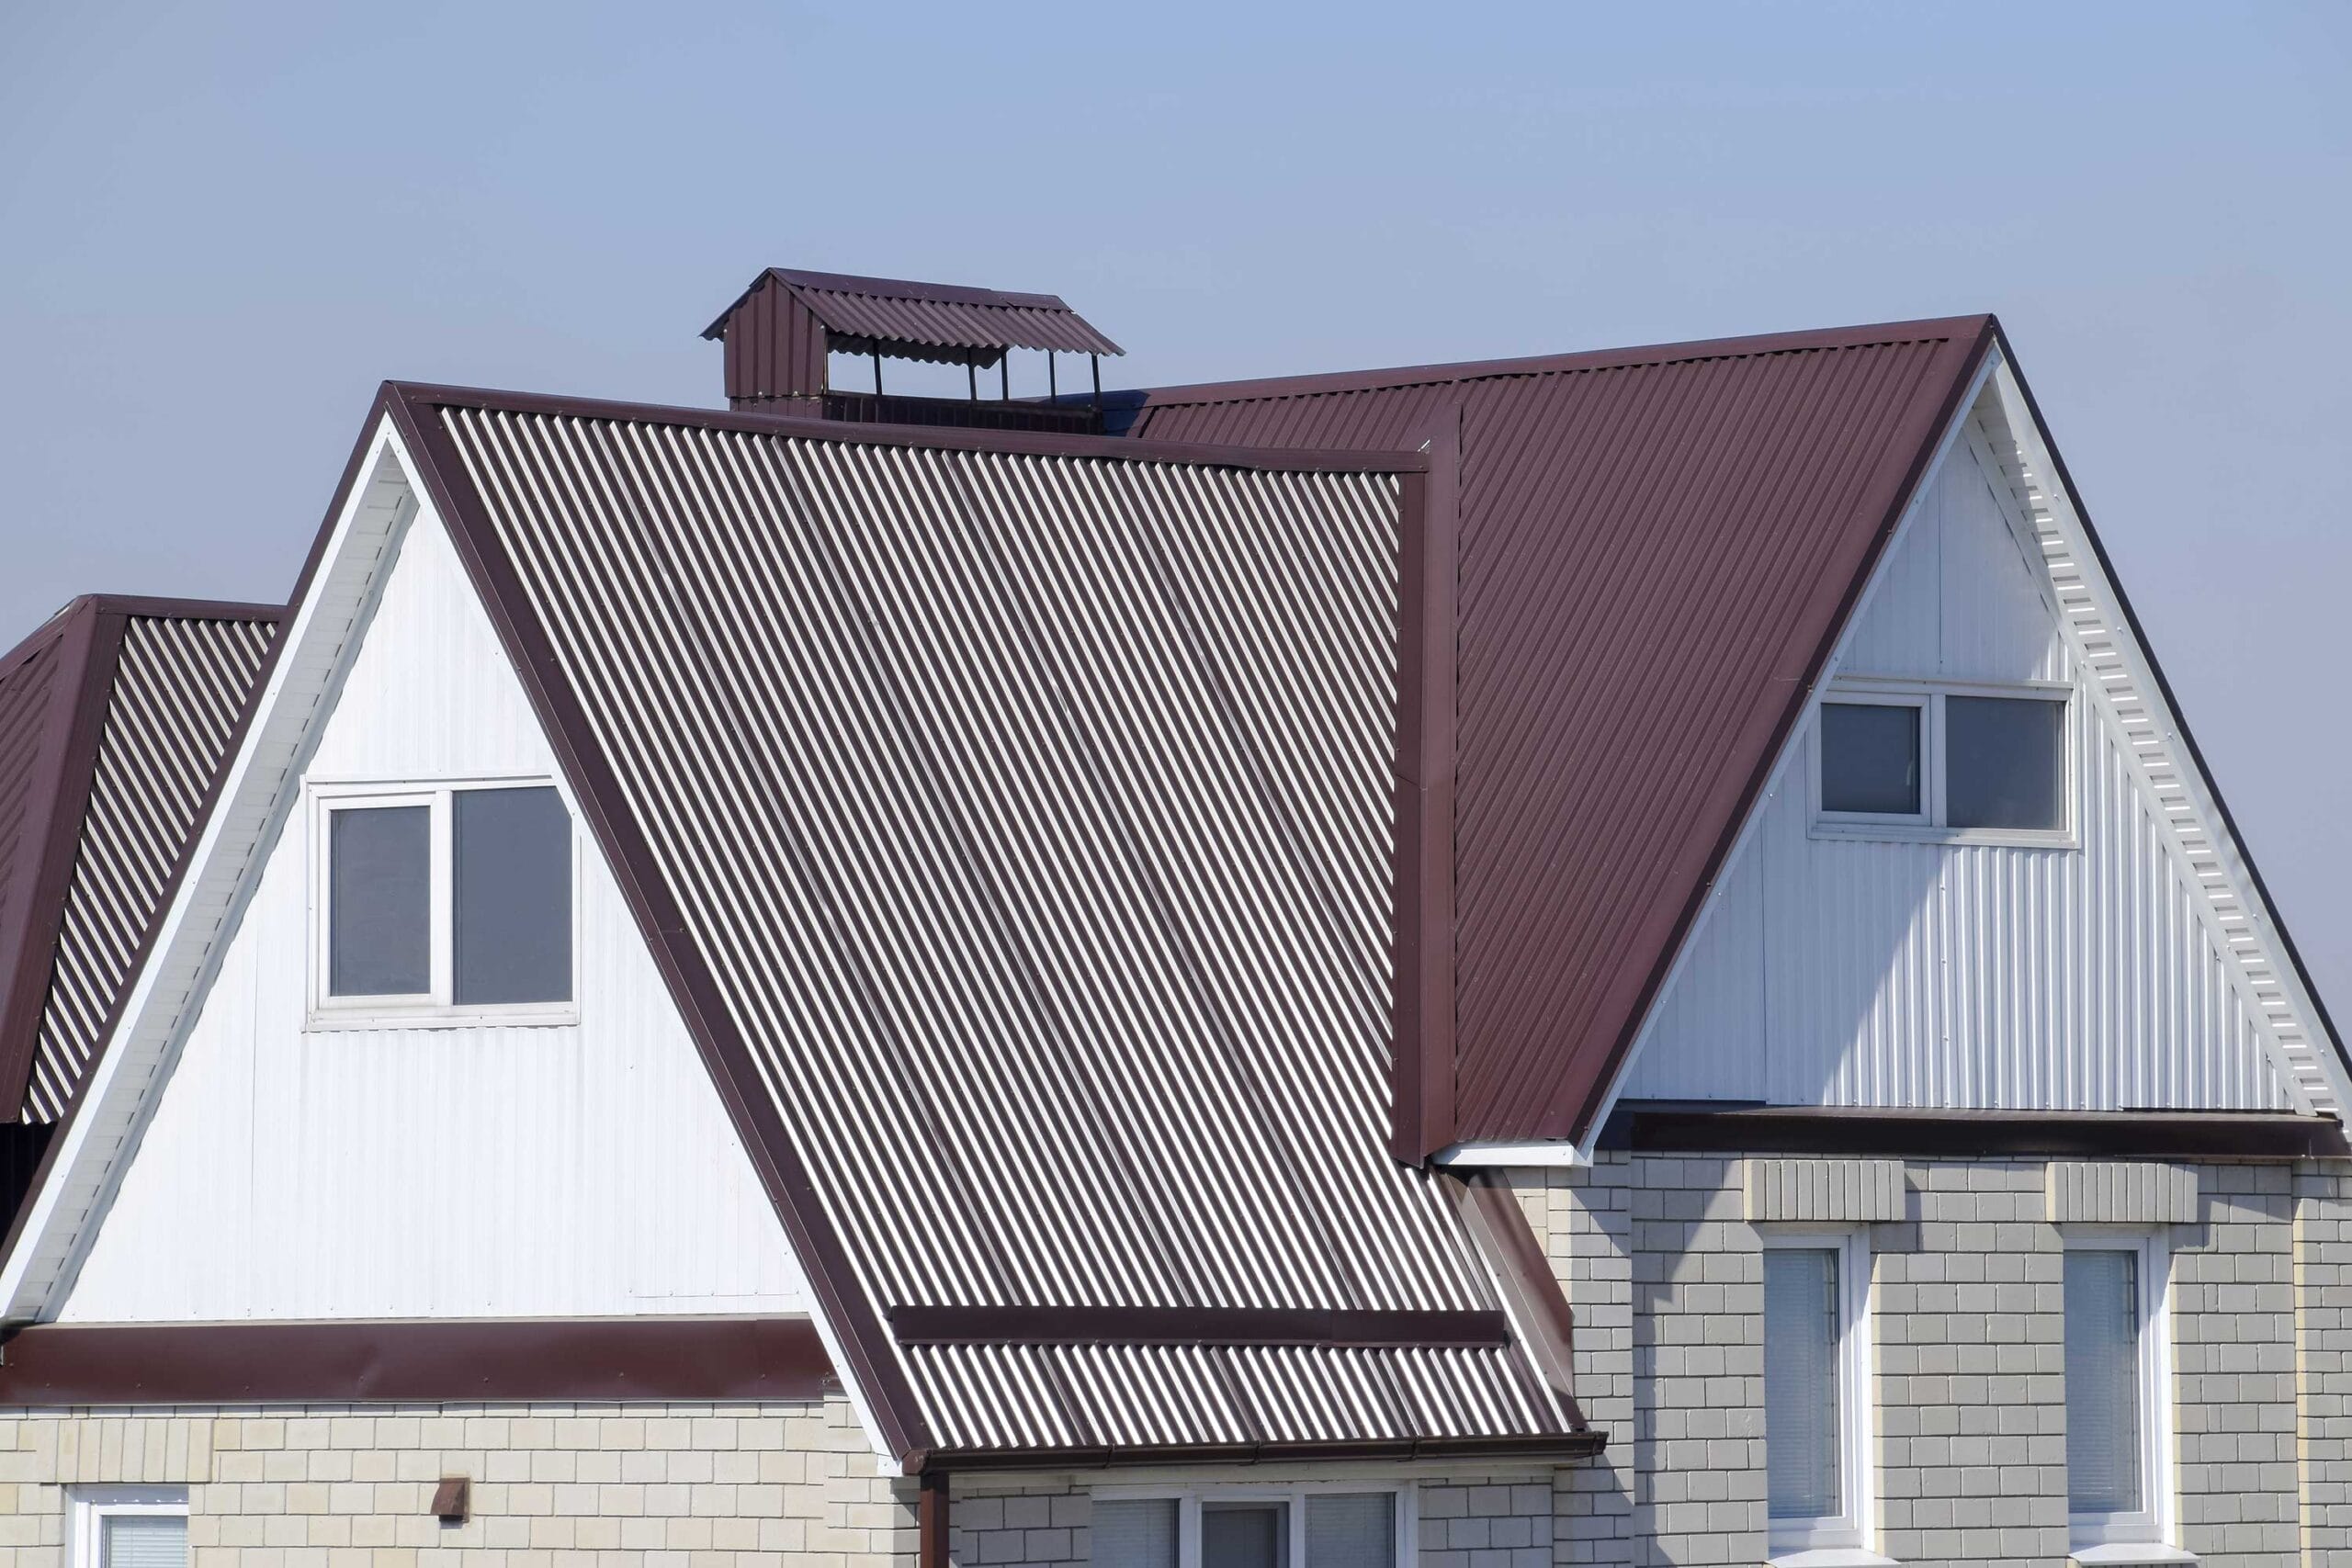 popular roof types, popular roof shapes, best roof style